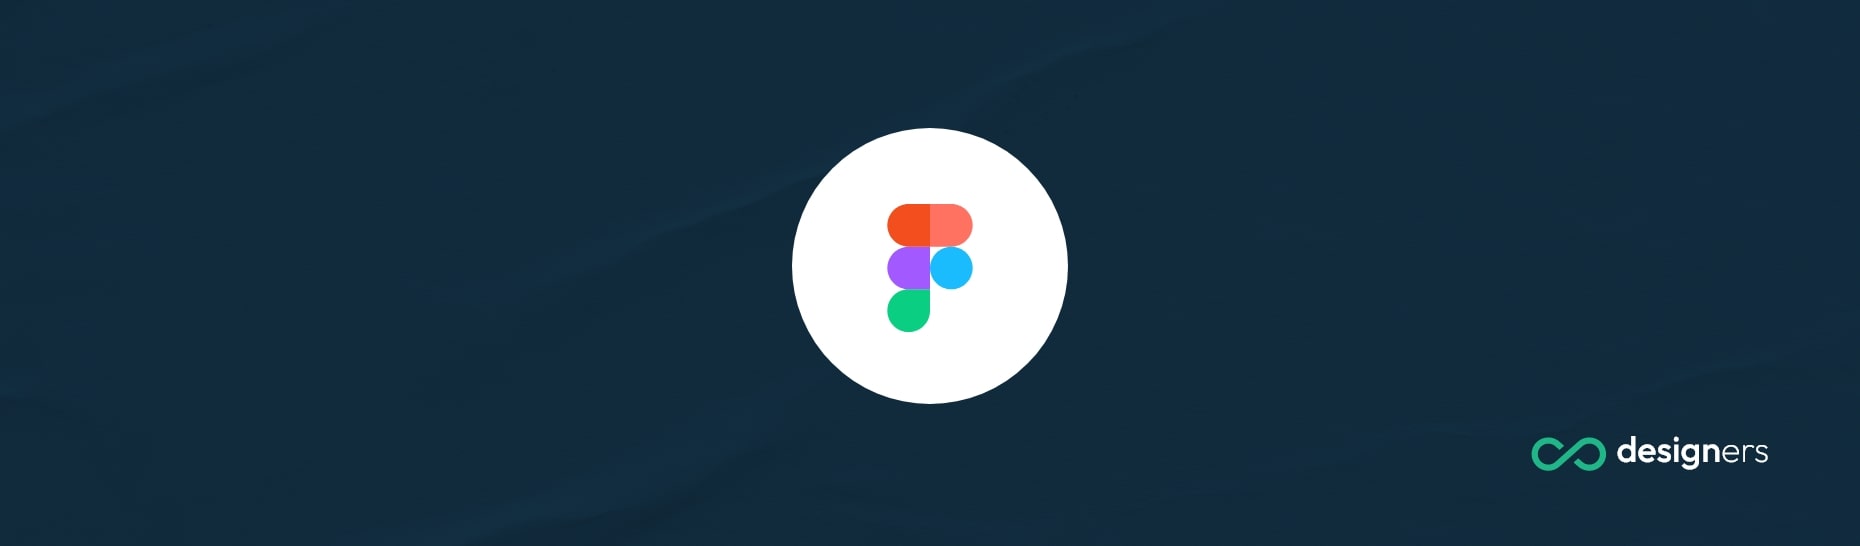 How to Change Color of an Icon in Figma?